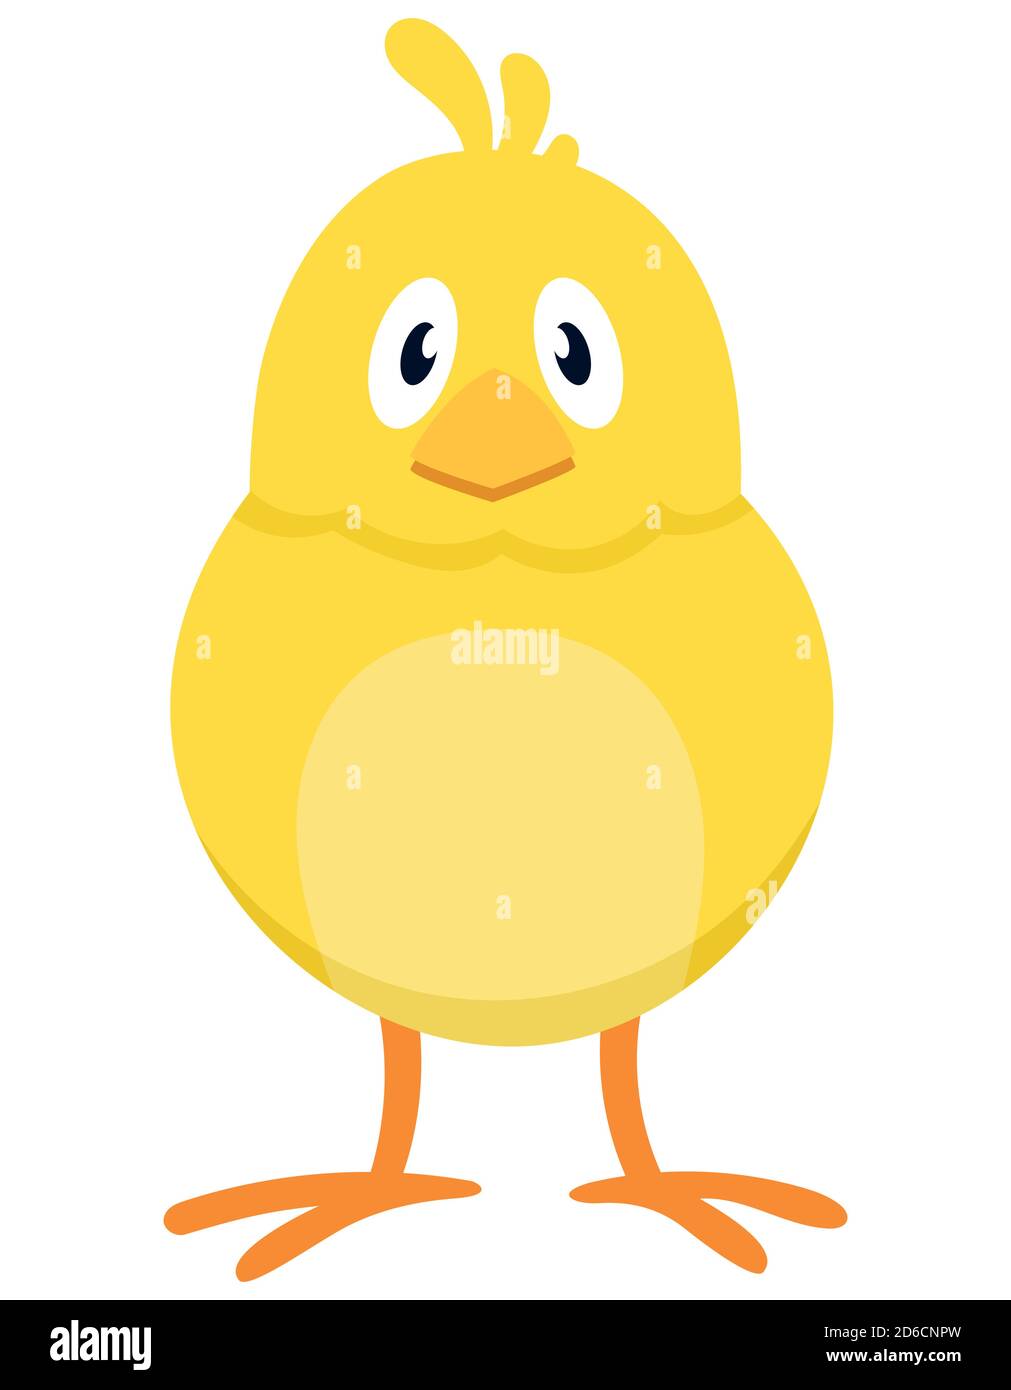 Chick front view. Farm animal in cartoon style. Stock Vector